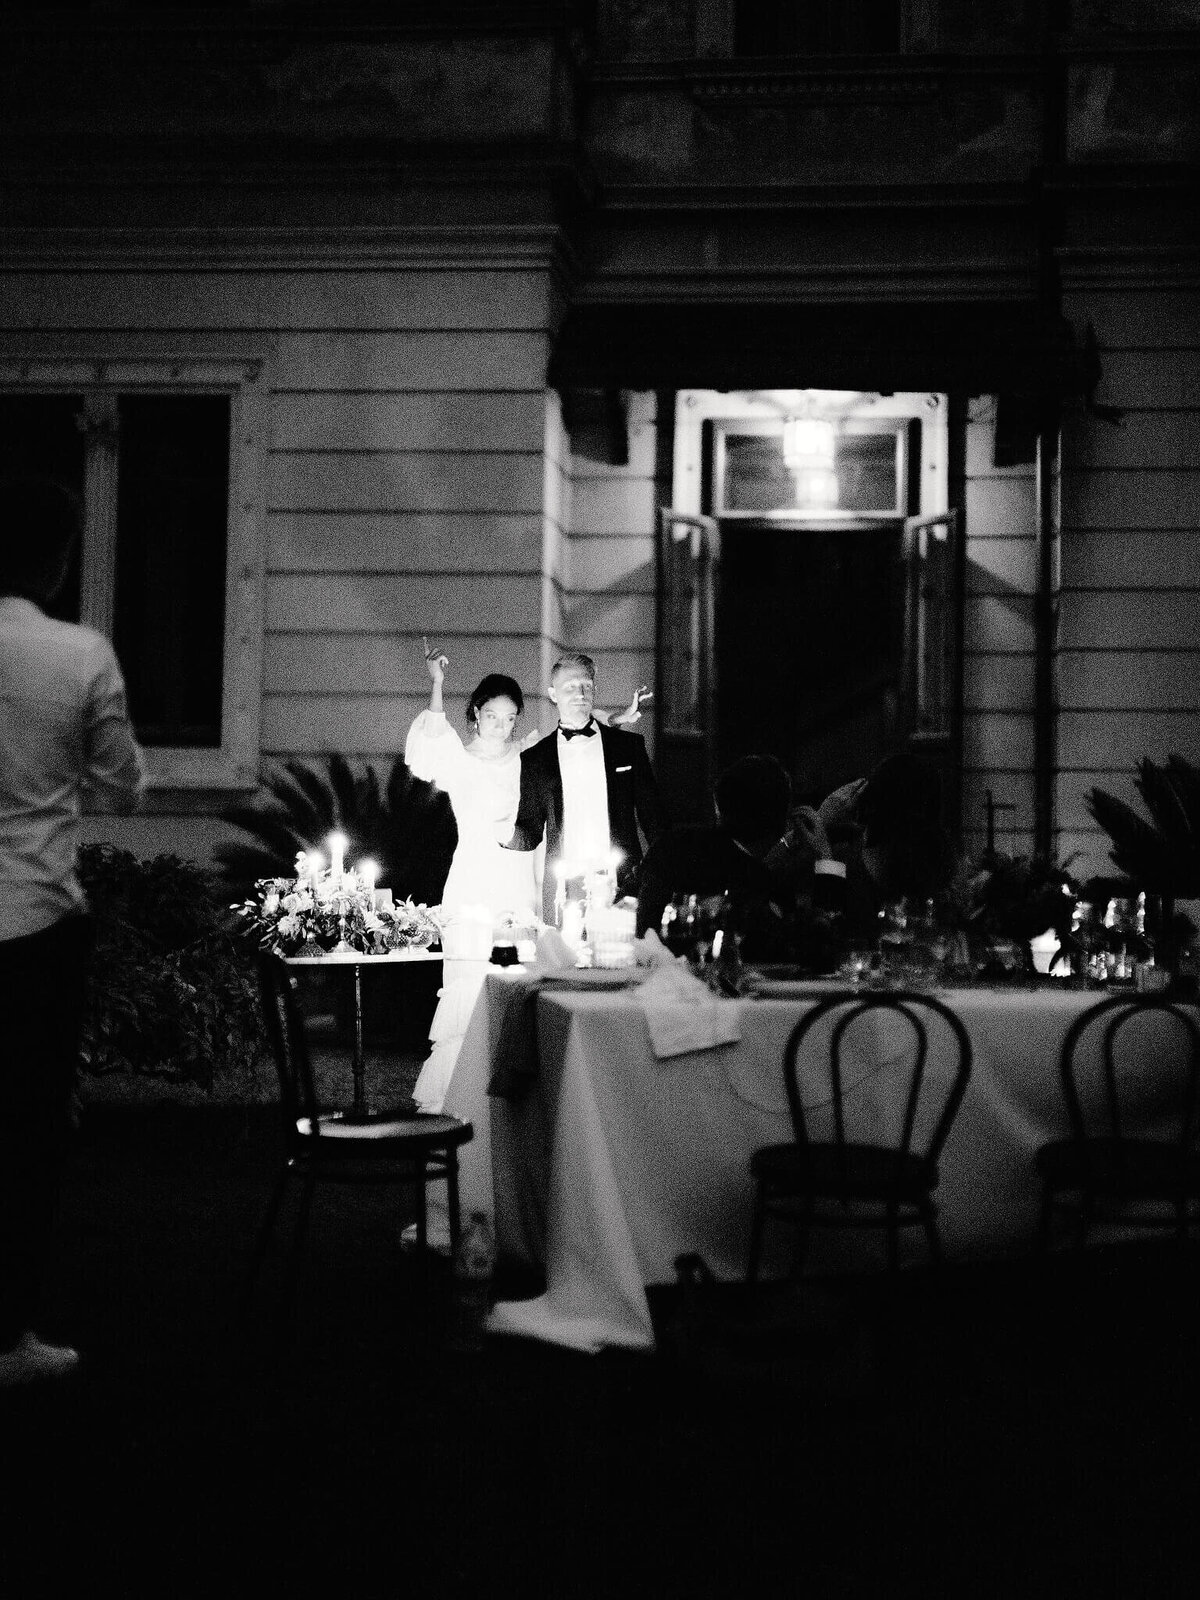 Bride and groom standing, the bride's right arm is raised in the air, with a dining table in front and a villa at the back.